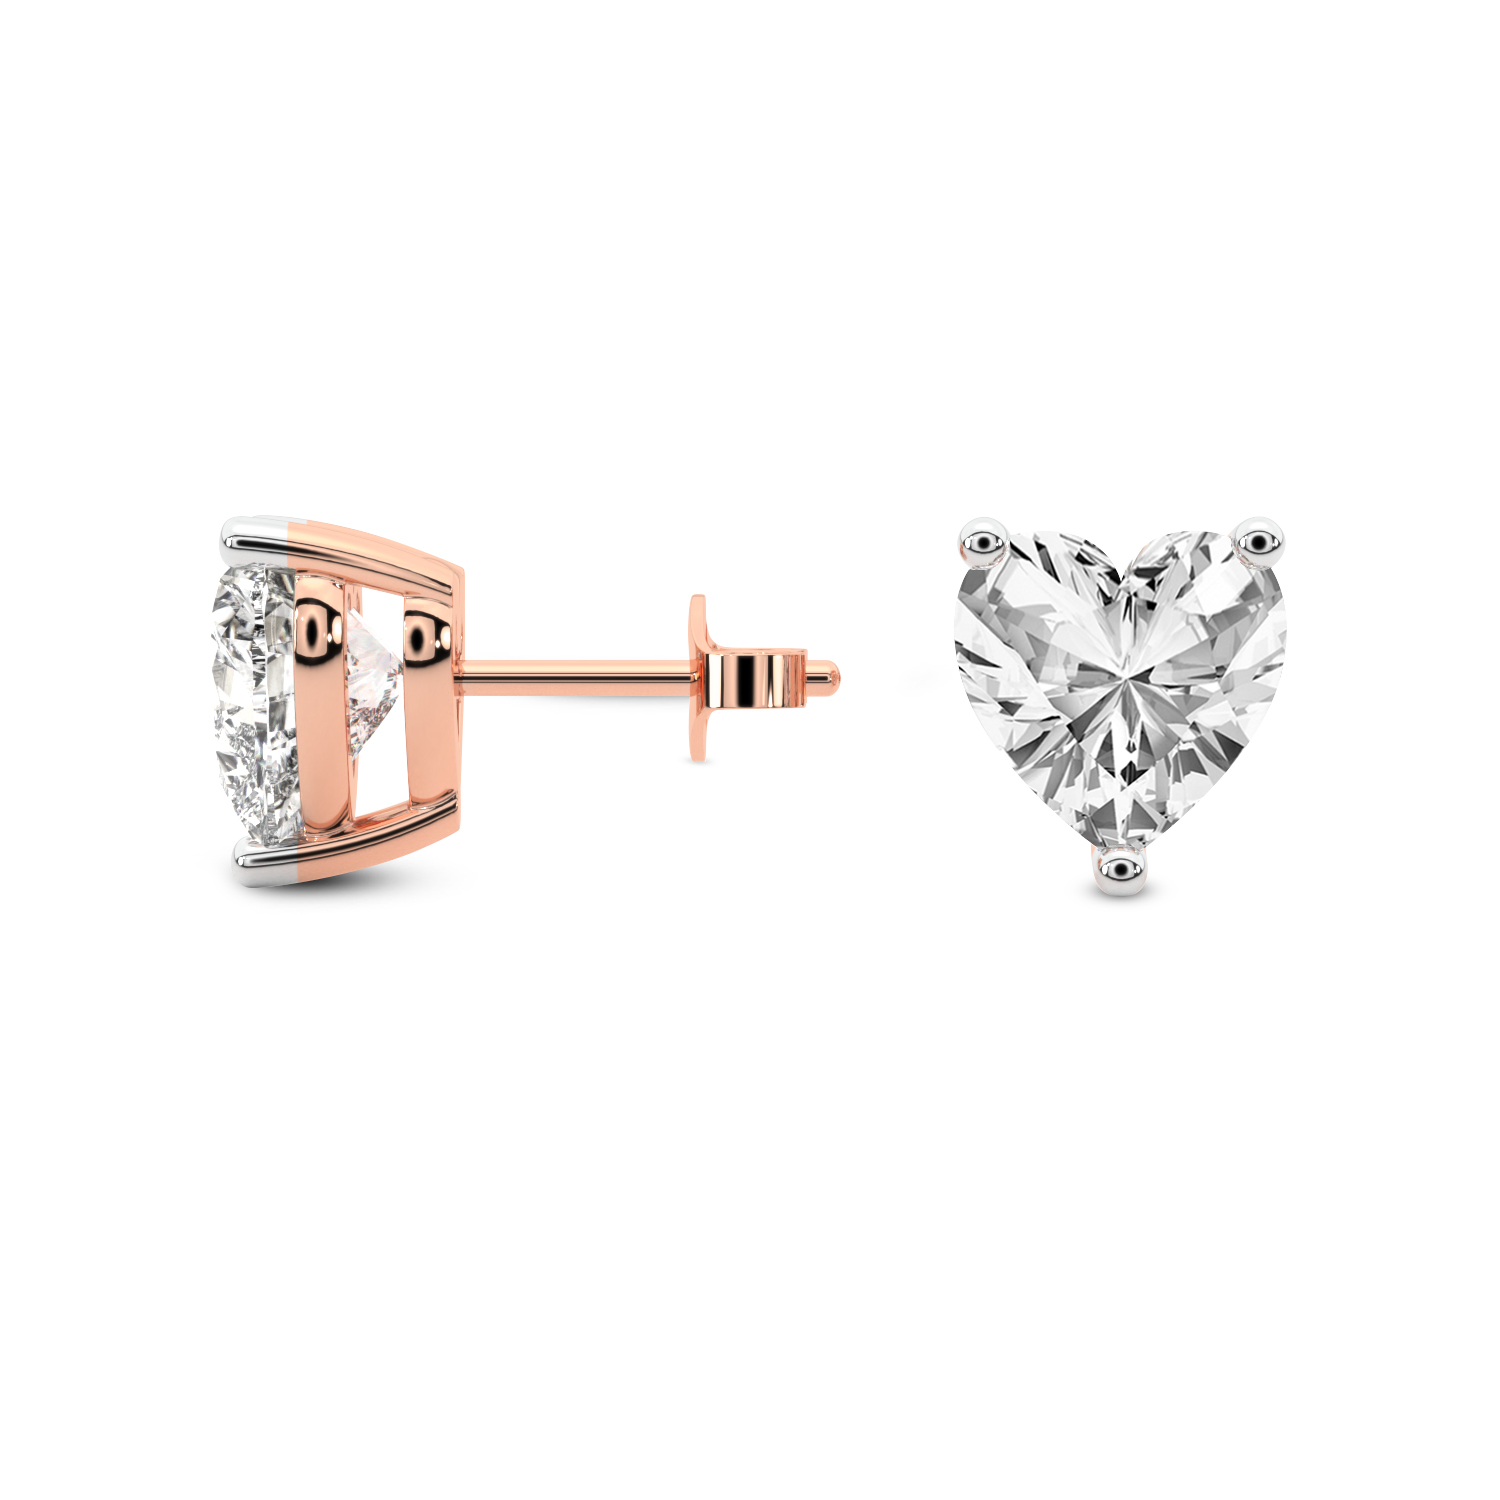 3 Prong Heart Lab Diamond Stud Earrings rose gold earring, small left view